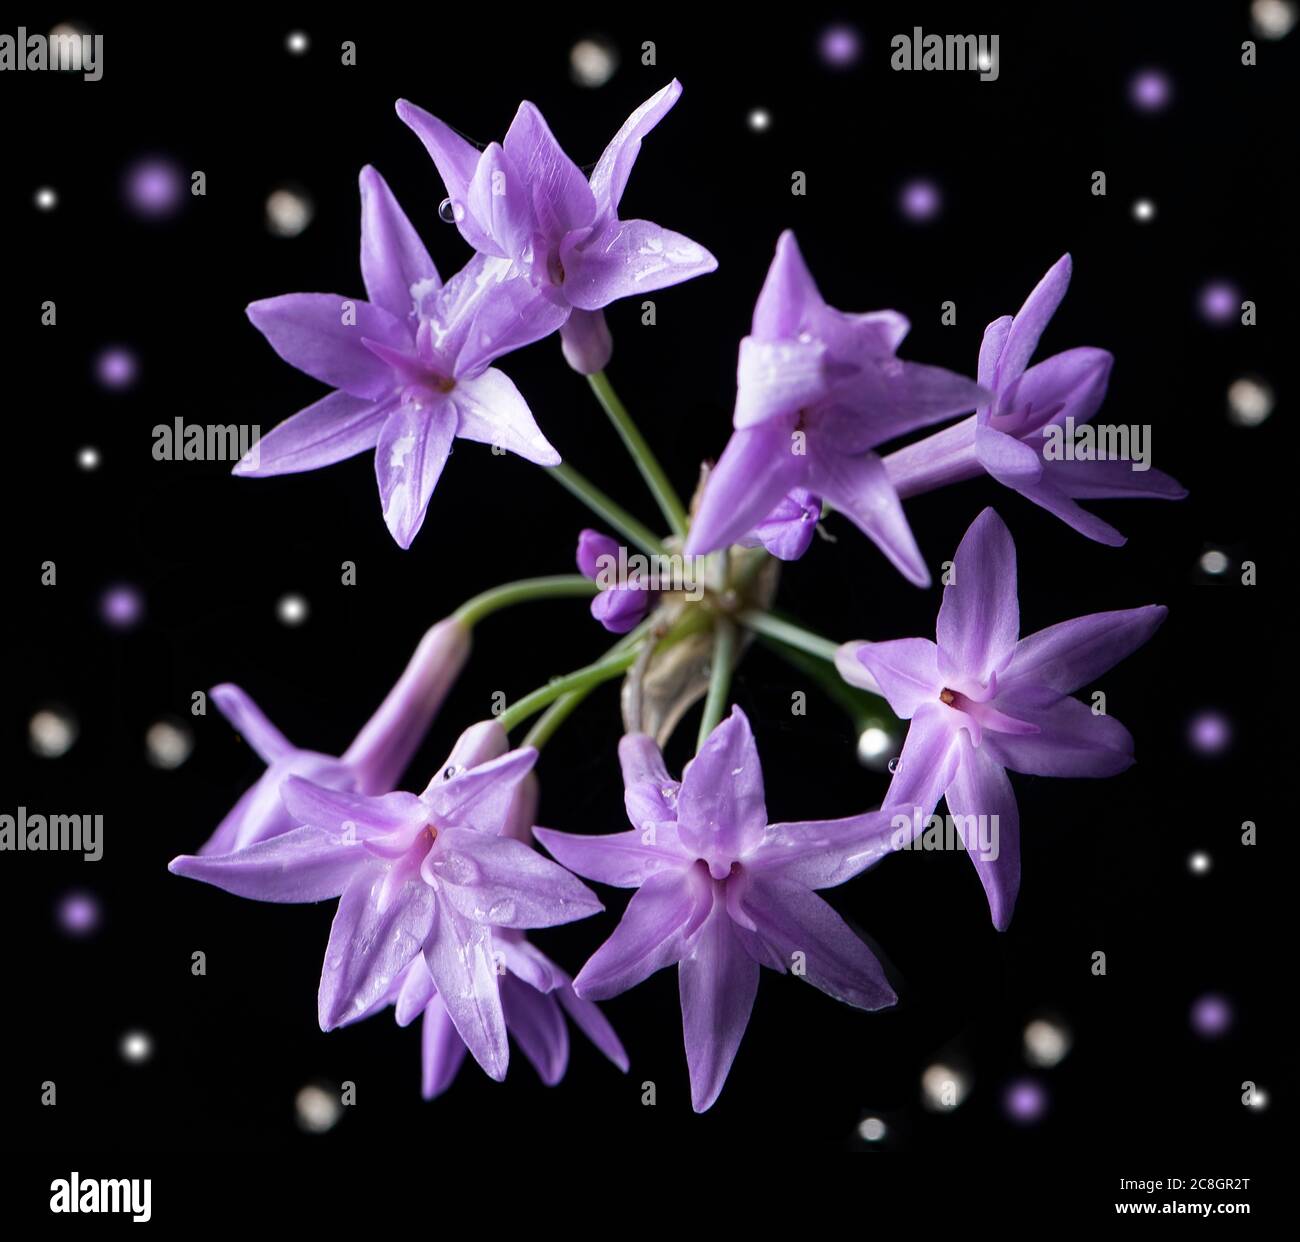 Purple star shaped flowers from the Society Garlic Plant Stock Photo